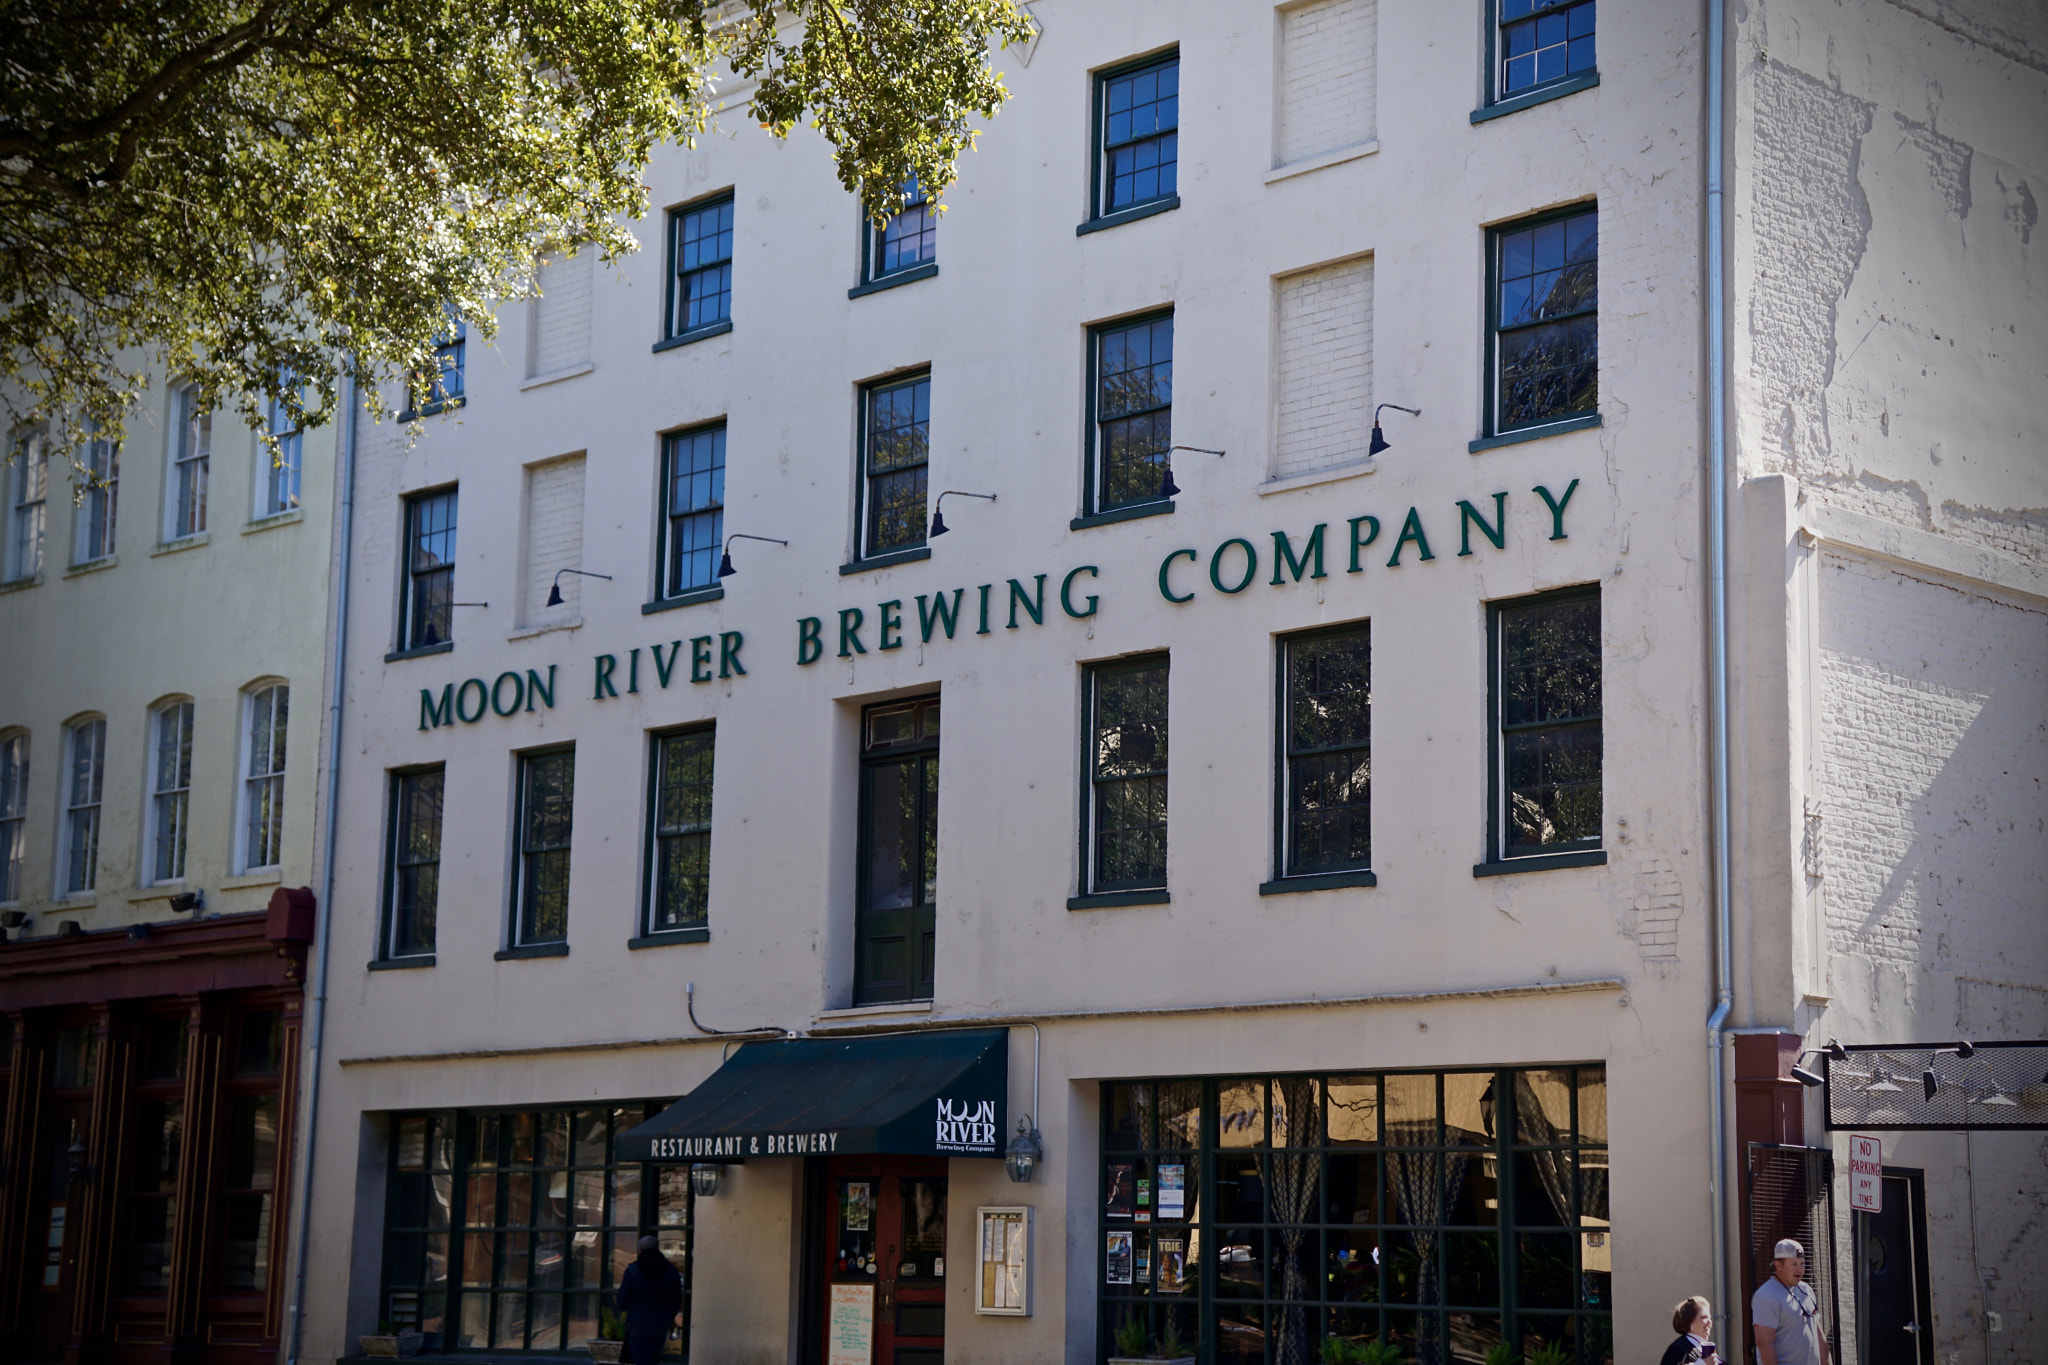 Sony a6000 + Tamron 18-200mm F3.5-6.3 Di III VC sample photo. Moon river brewing co. photography